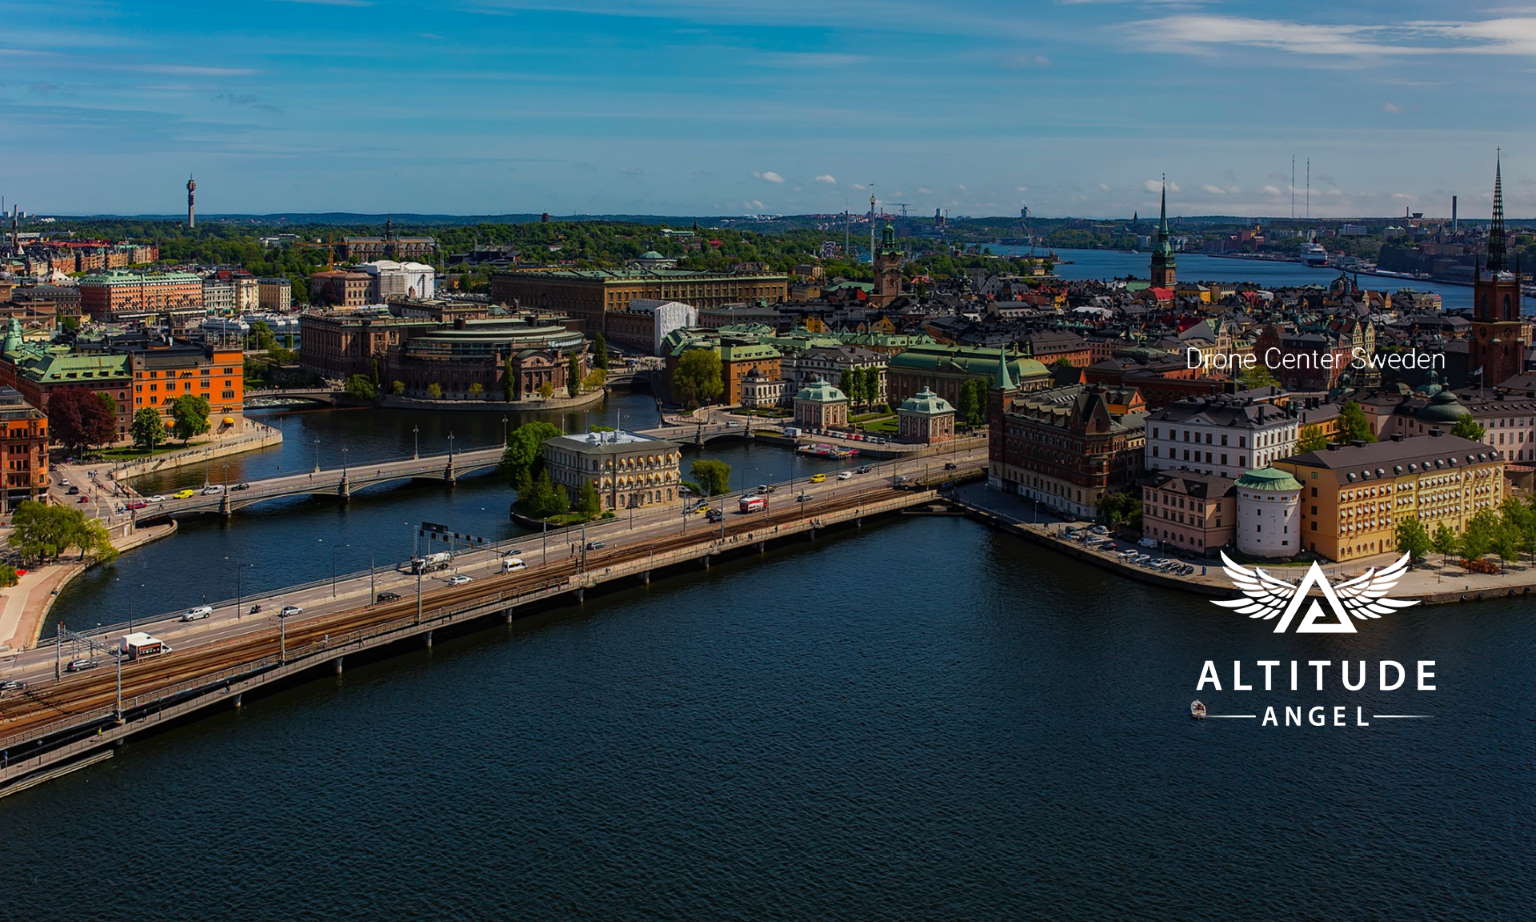 Drone Center Sweden select Altitude Angel as the ‘Foundation Stone’ as it begins to build a national drone infrastructure